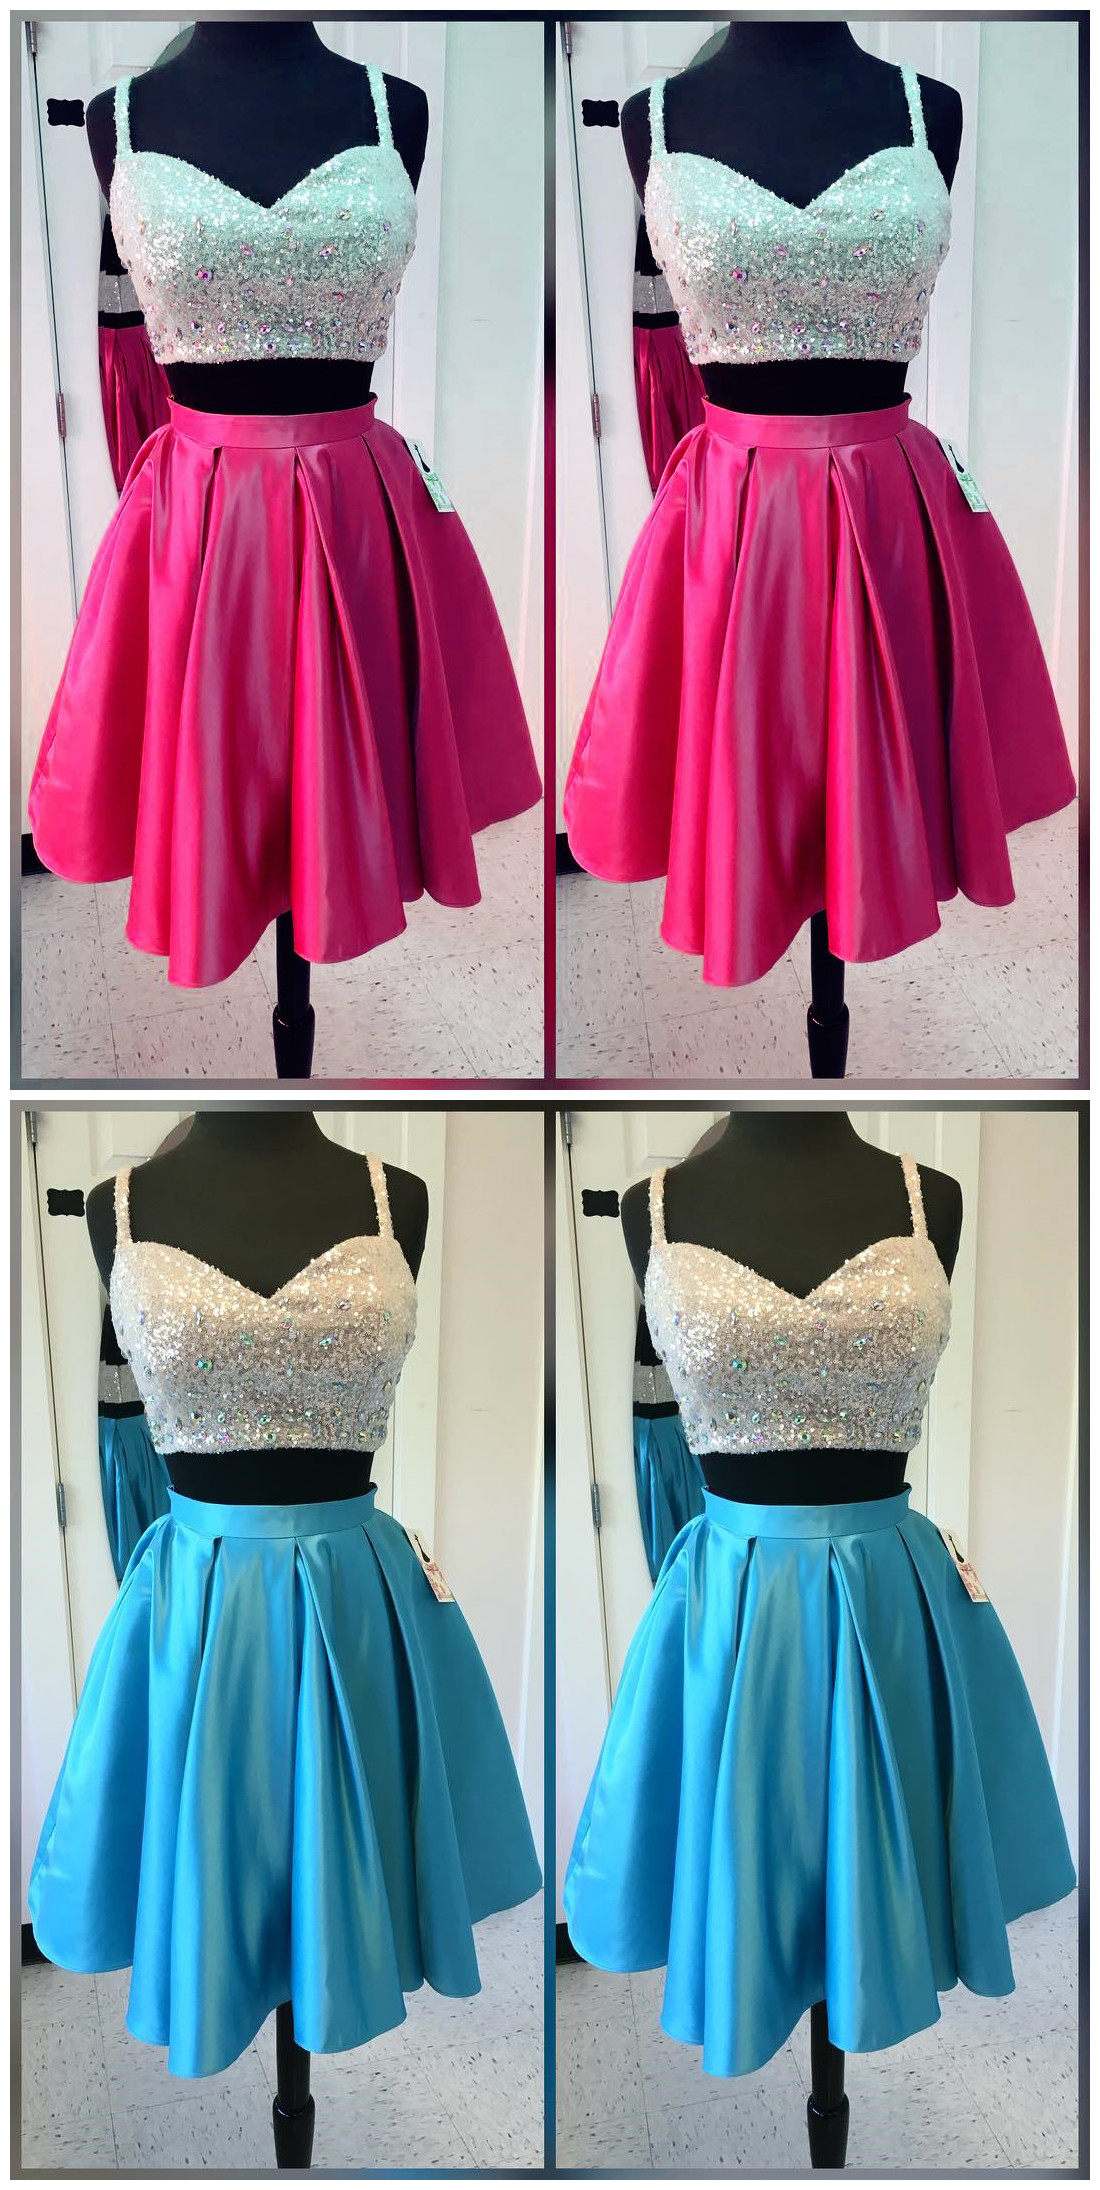 Homecoming Dresses,women's Party Dresses,short Satin Two Piece Homecoming Dresses With Sequin Top,sparkly Prom Gowns,short Cocktail